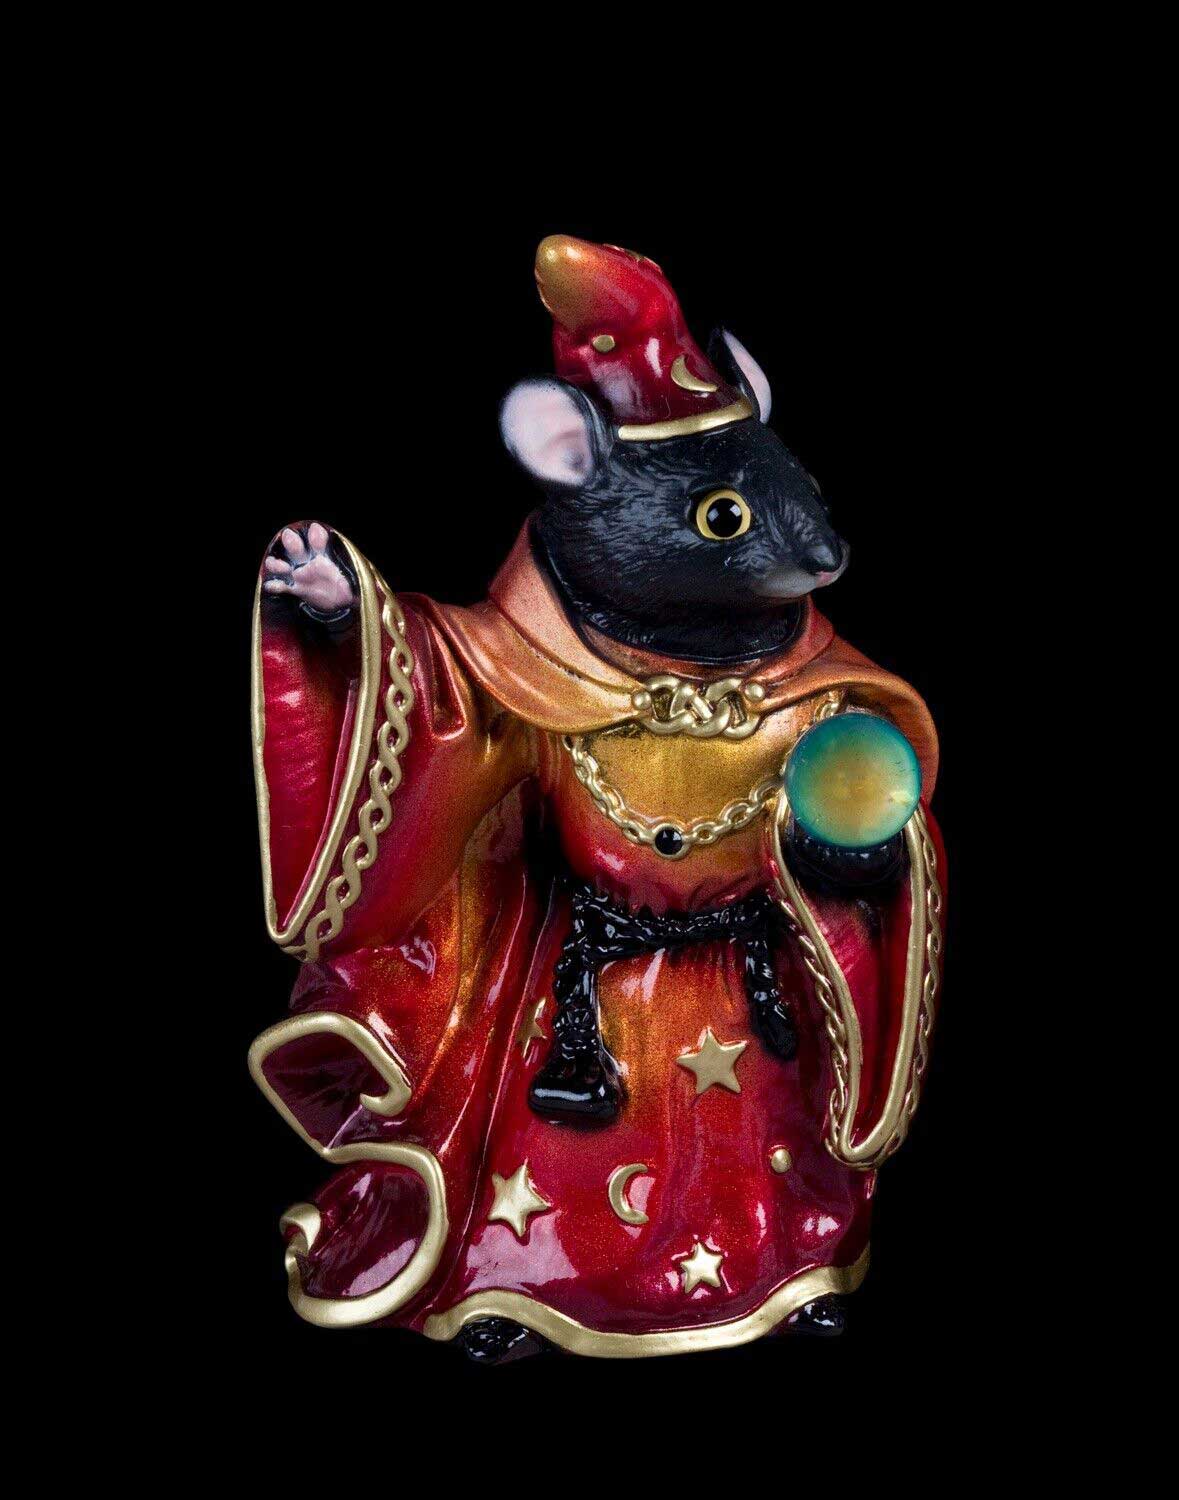 20230509-Brimstone-Mouse-Wizard-Test-Paint-1-by-Gina